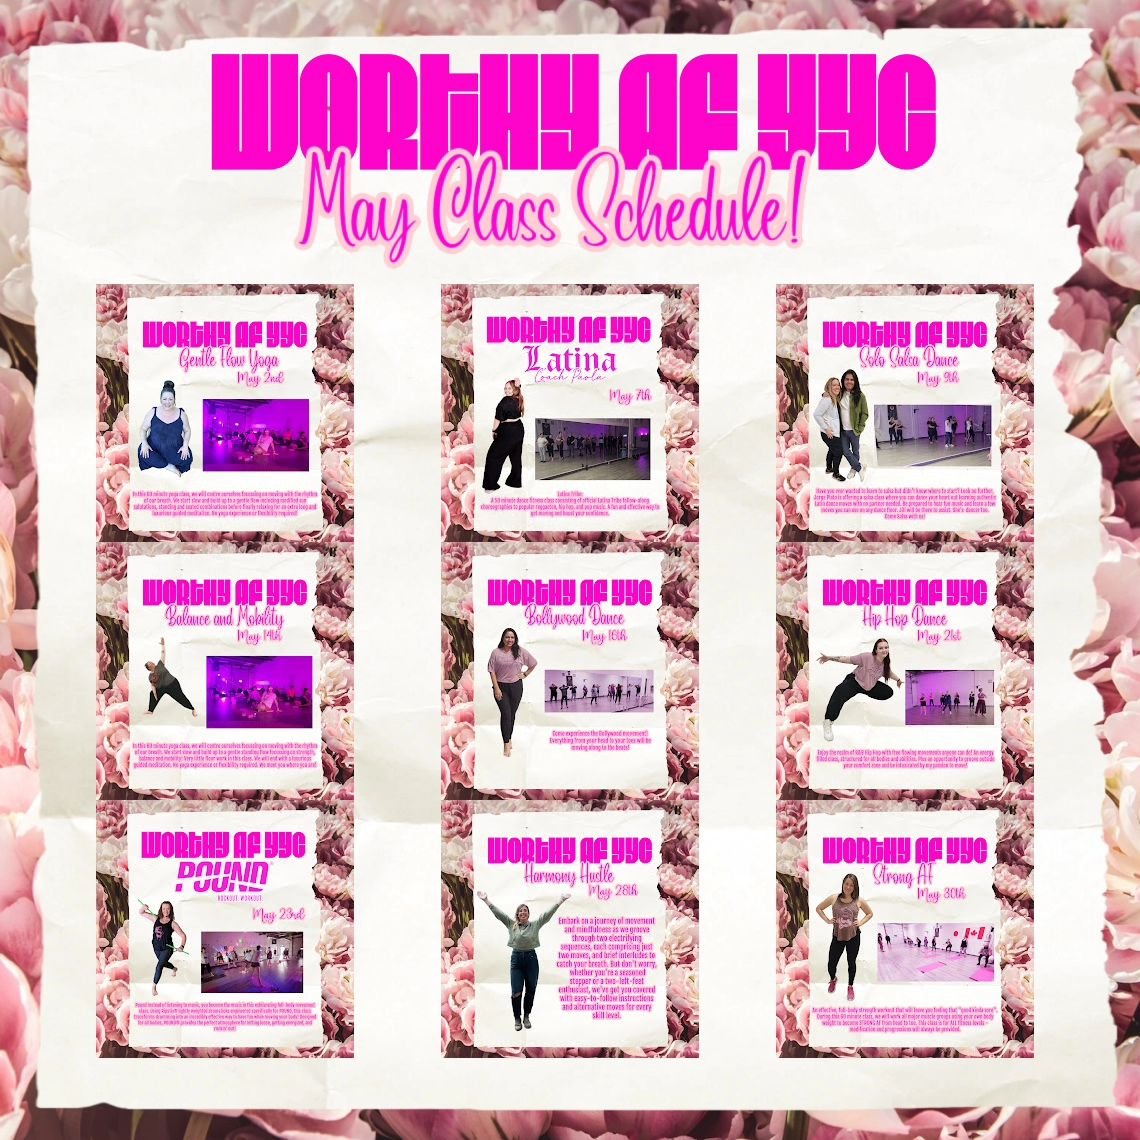 It was brought to my attention I haven't posted our awesome May line up!! I am so looking forward to another month of movement with this incredible community! We hope to see you there!!